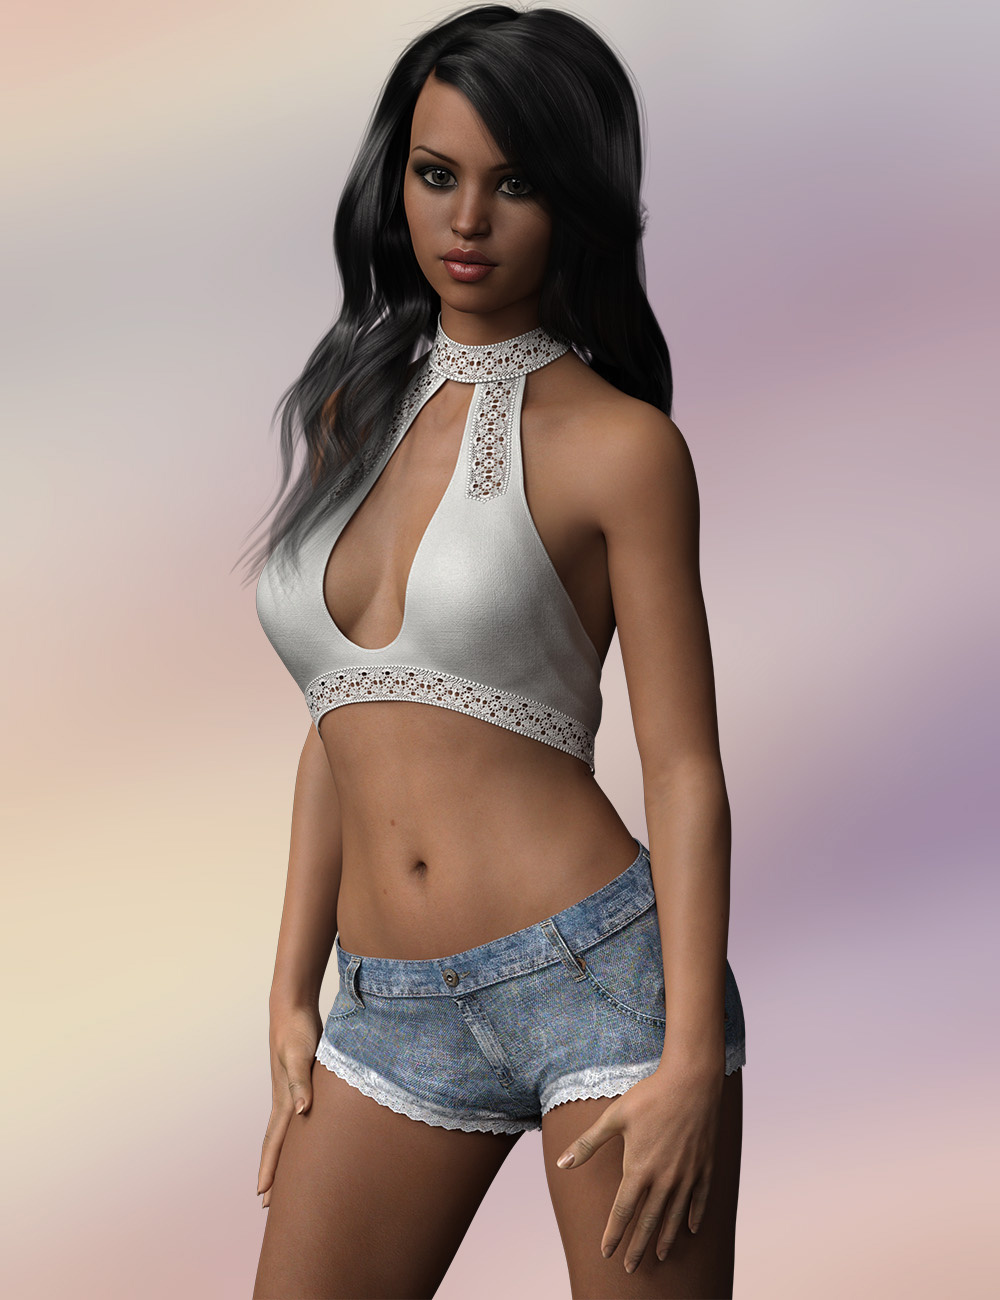 Javeria for Victoria 7 and Genesis 3_DAZ3DDL